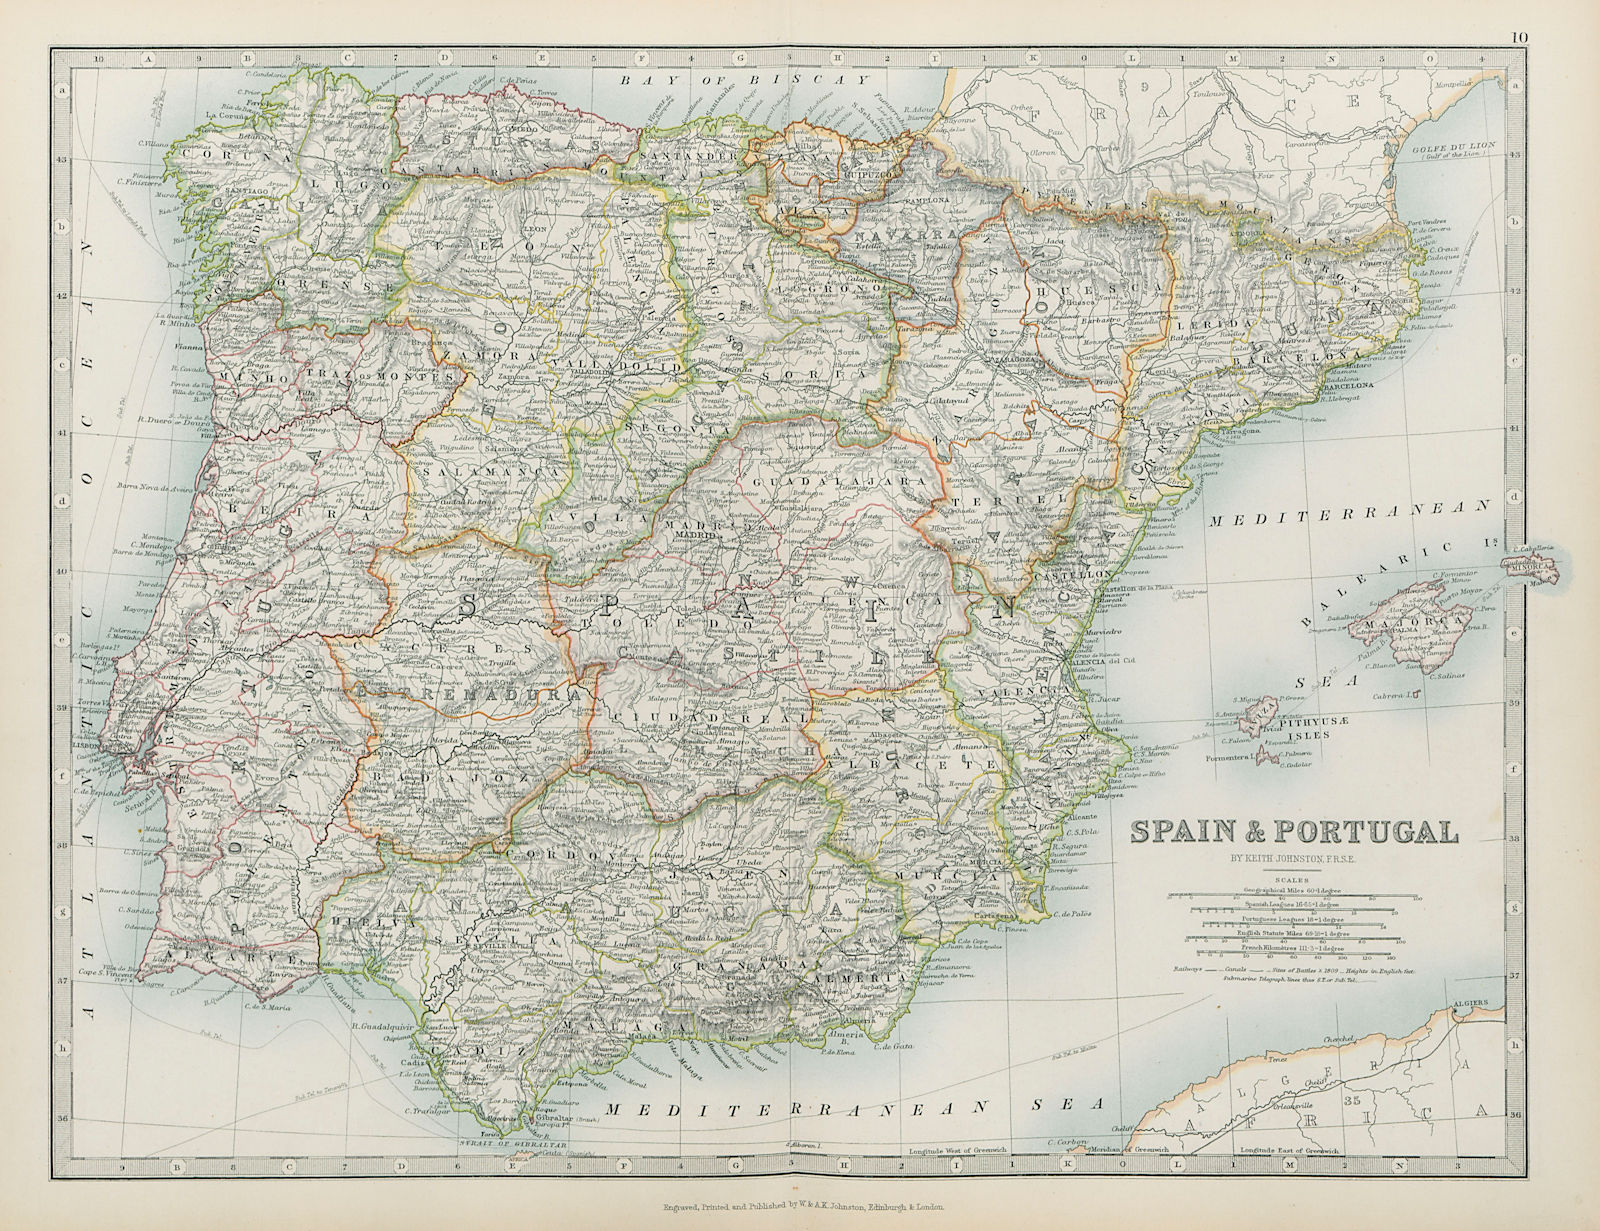 Associate Product IBERIA Spain Portugal regions Telegraph cables railways JOHNSTON 1901 old map